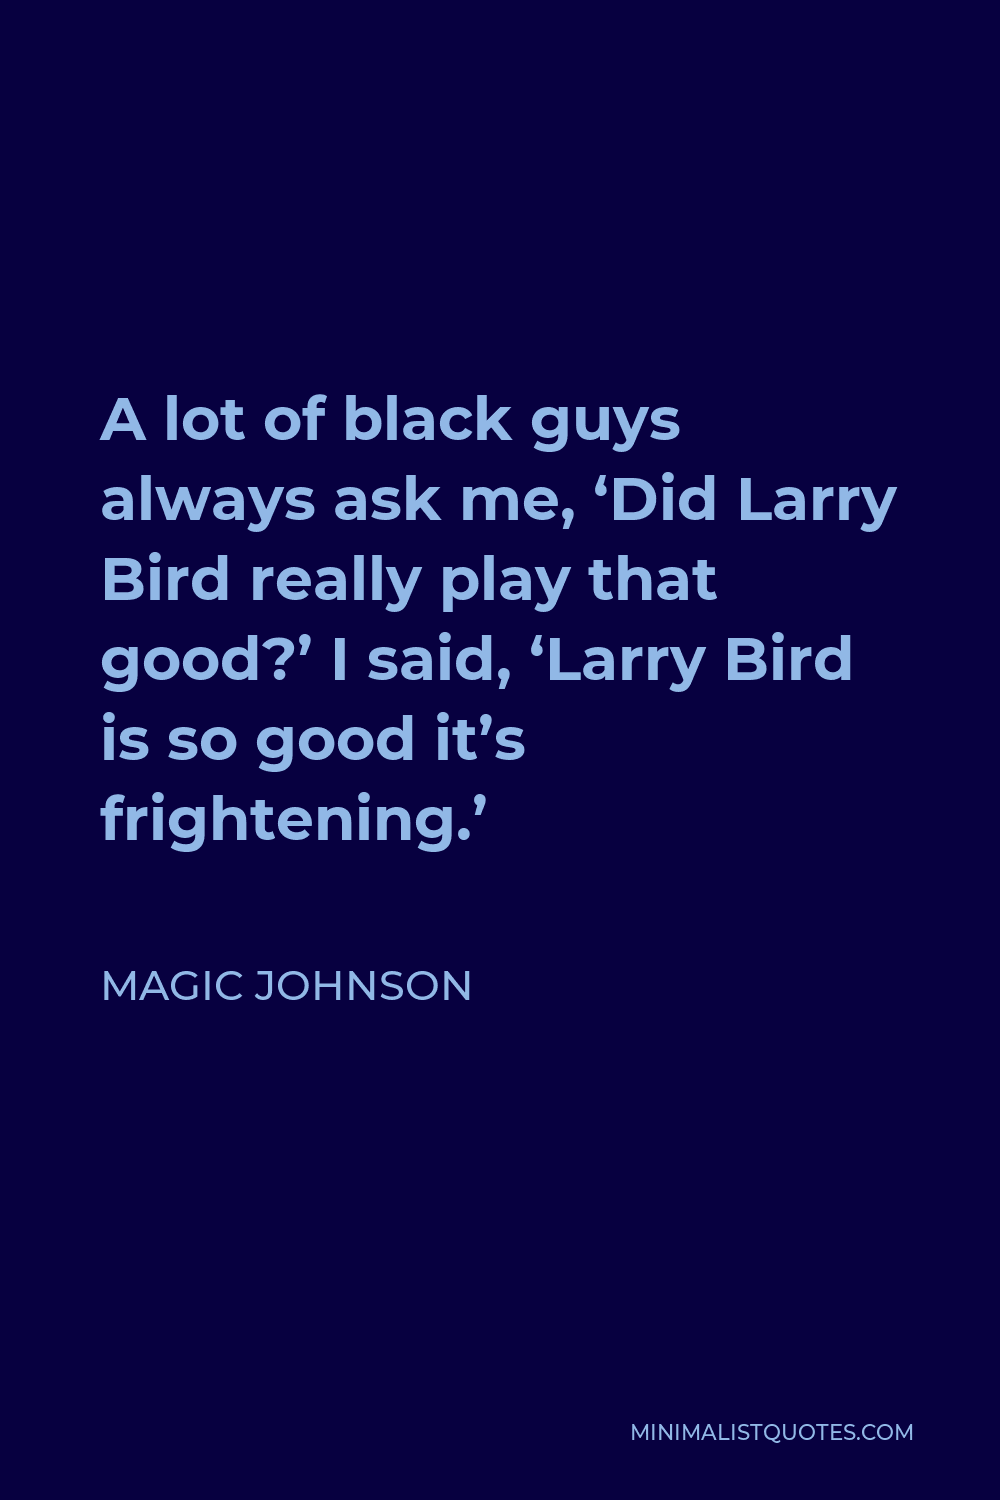 Magic Johnson Quote - A lot of black guys always ask me, ‘Did Larry Bird really play that good?’ I said, ‘Larry Bird is so good it’s frightening.’